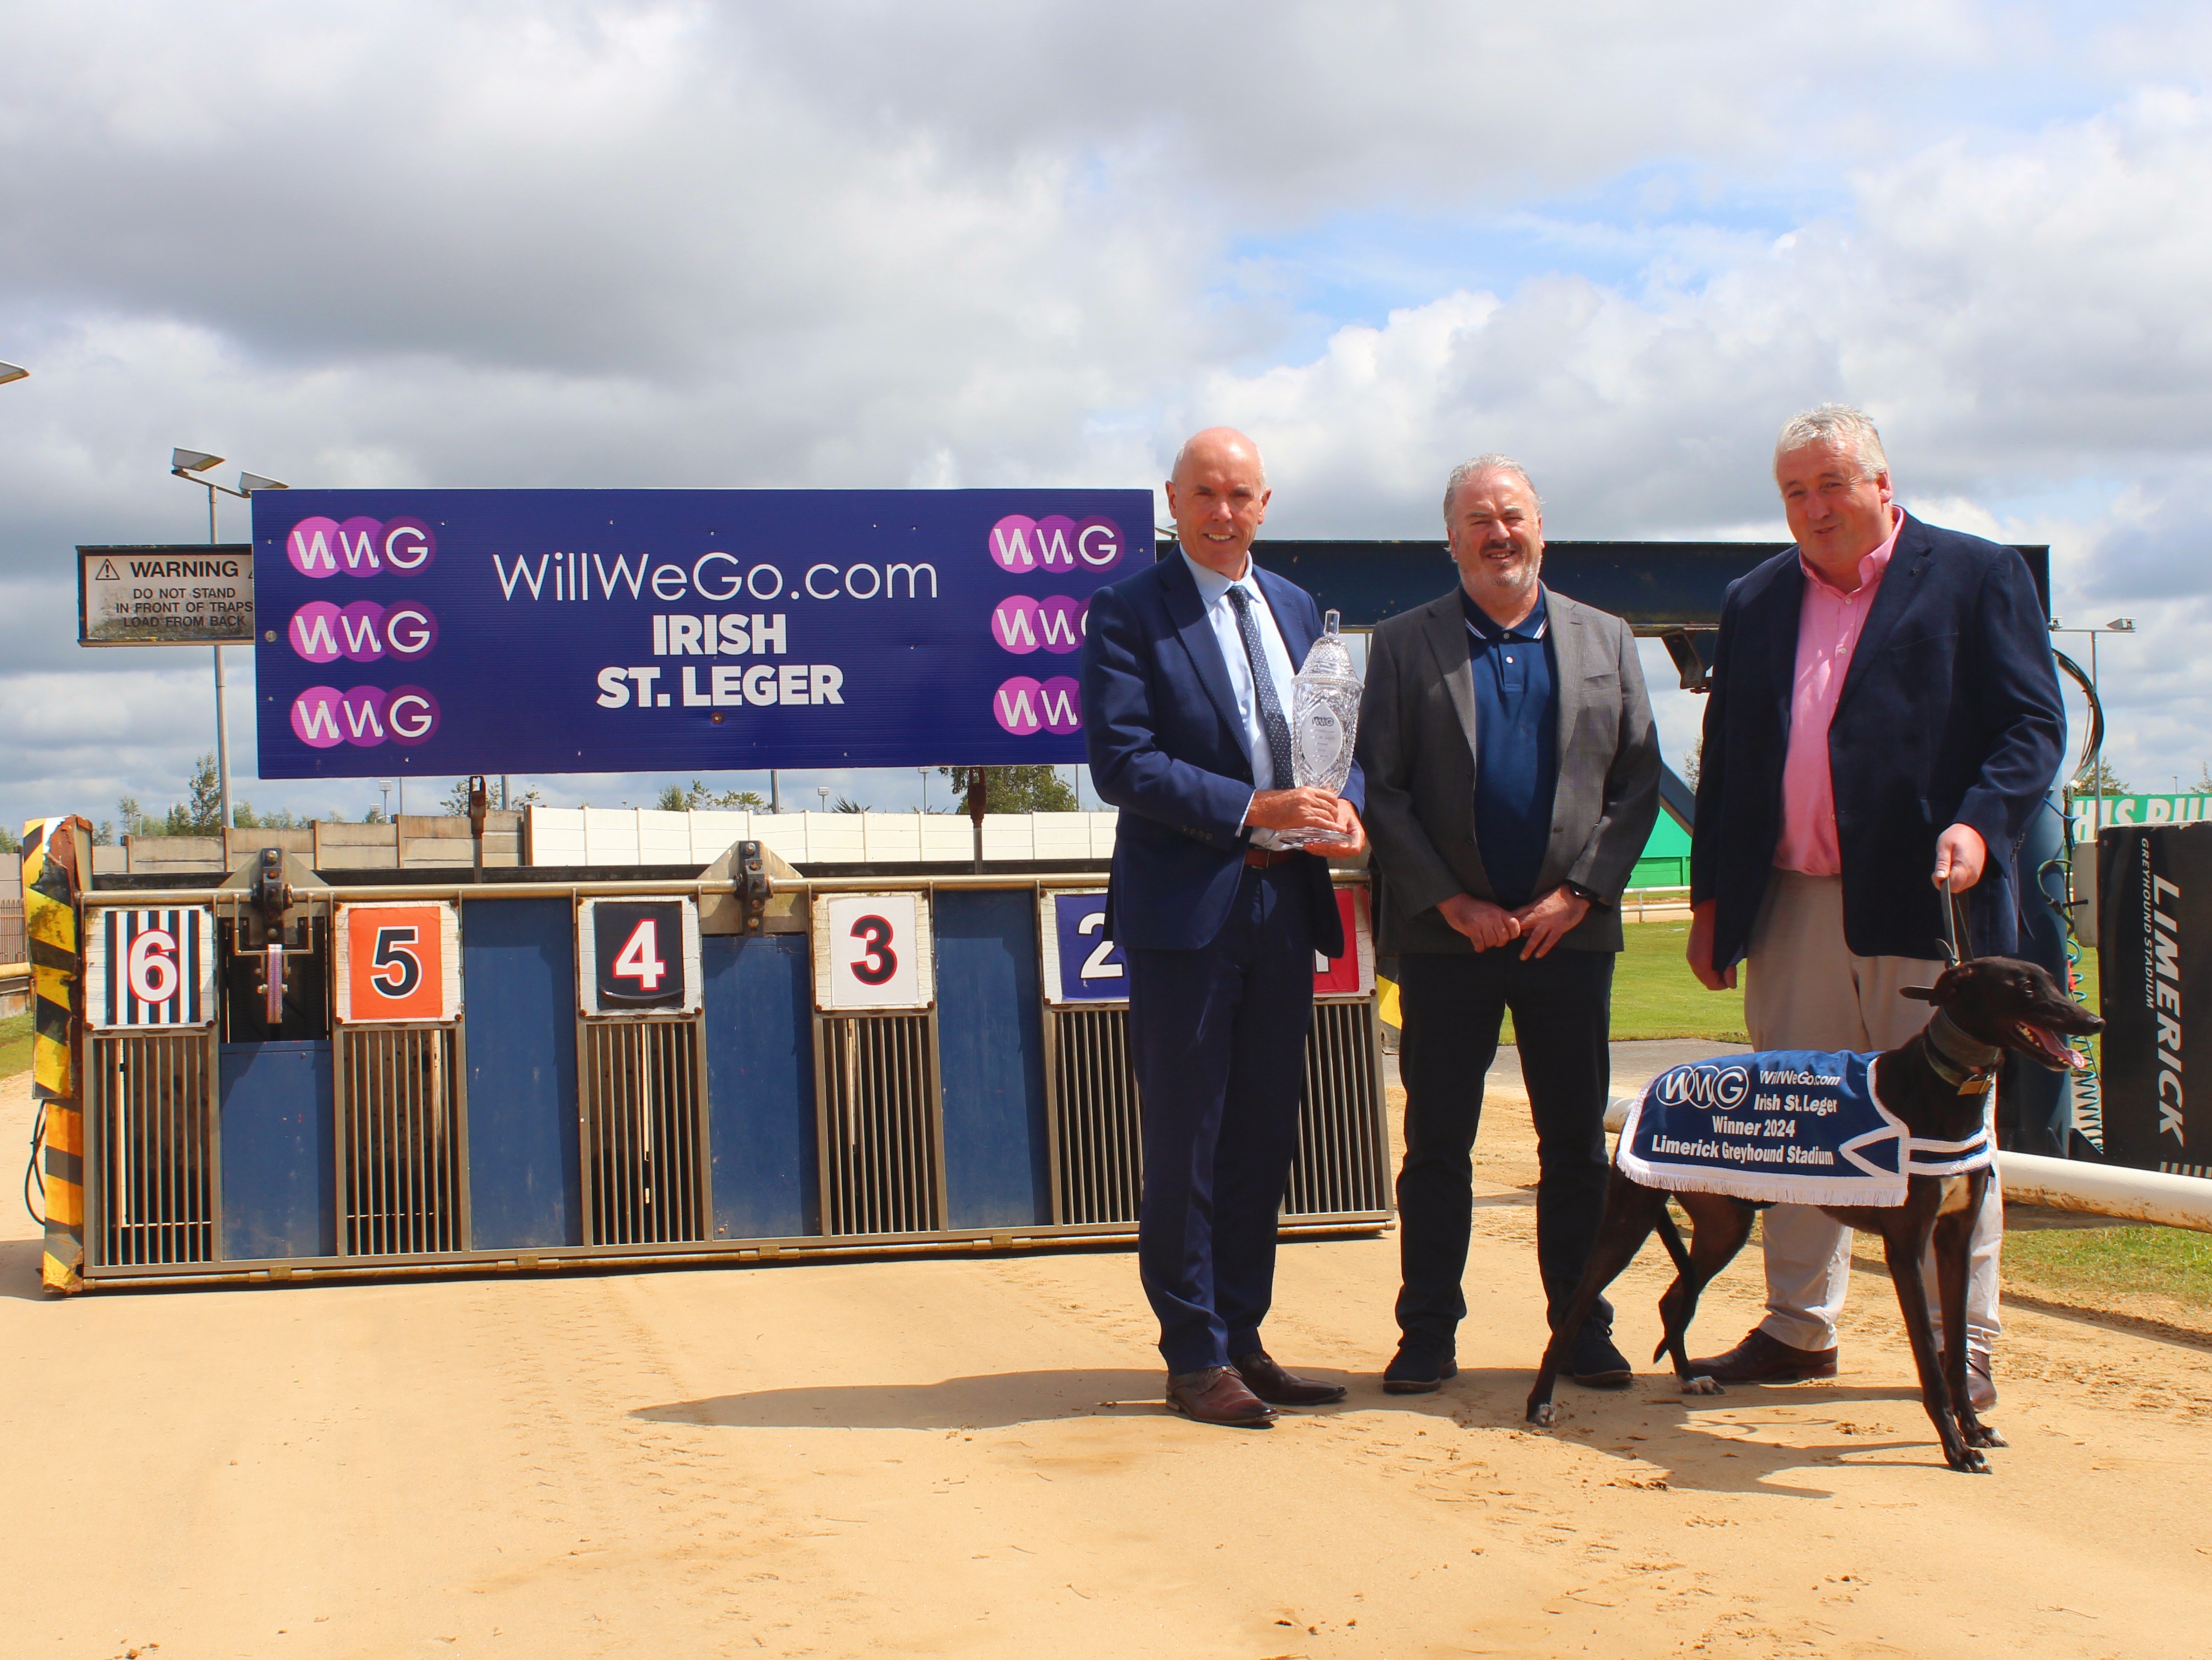 Tim Lucey CEO of GRI, holding the trophy for this year’s WillWeGo.com Irish St. Leger at Limerick Greyhound Stadium withRay Quinn, representing the sponsor, and Jody Thompson, Racing Manager, with Sombra the greyhound.